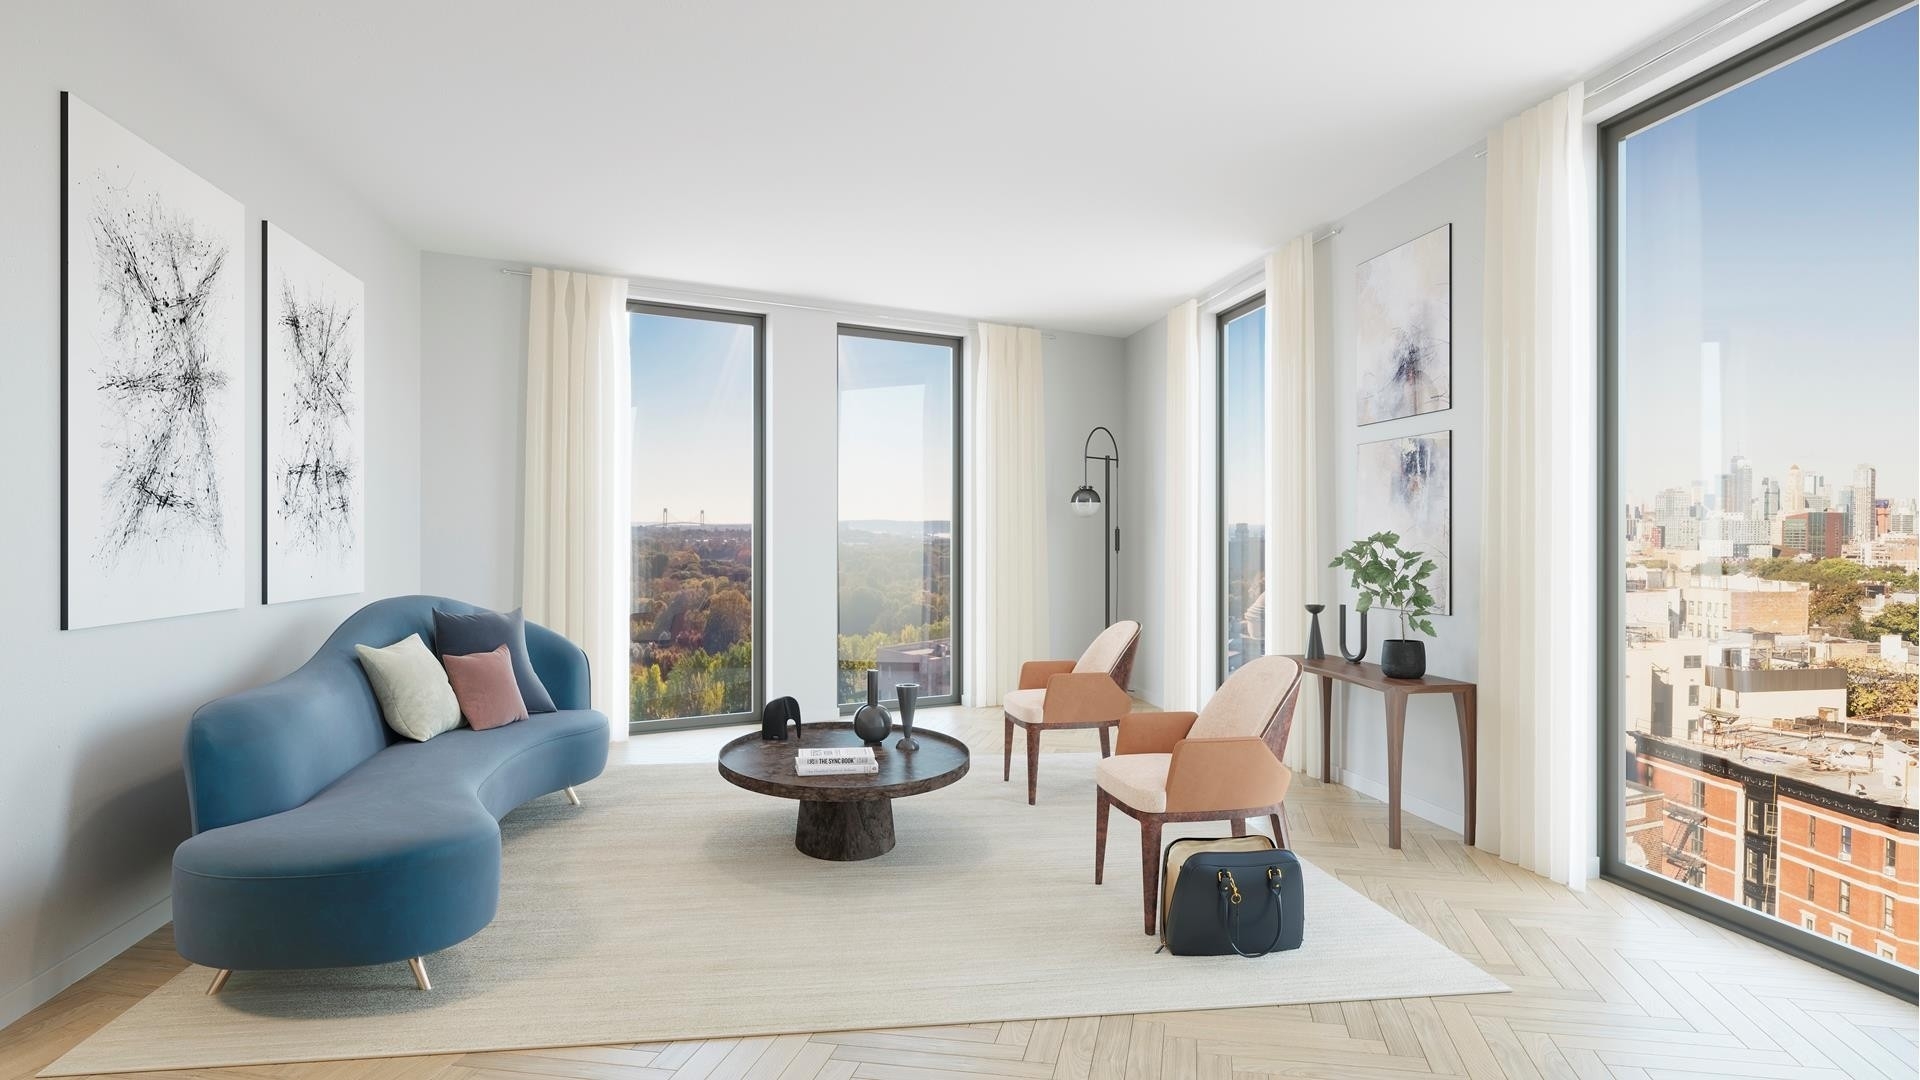 Condominium for Sale at The Museum House, 805 WASHINGTON AVE, PH9B Prospect Heights, Brooklyn, NY 11238